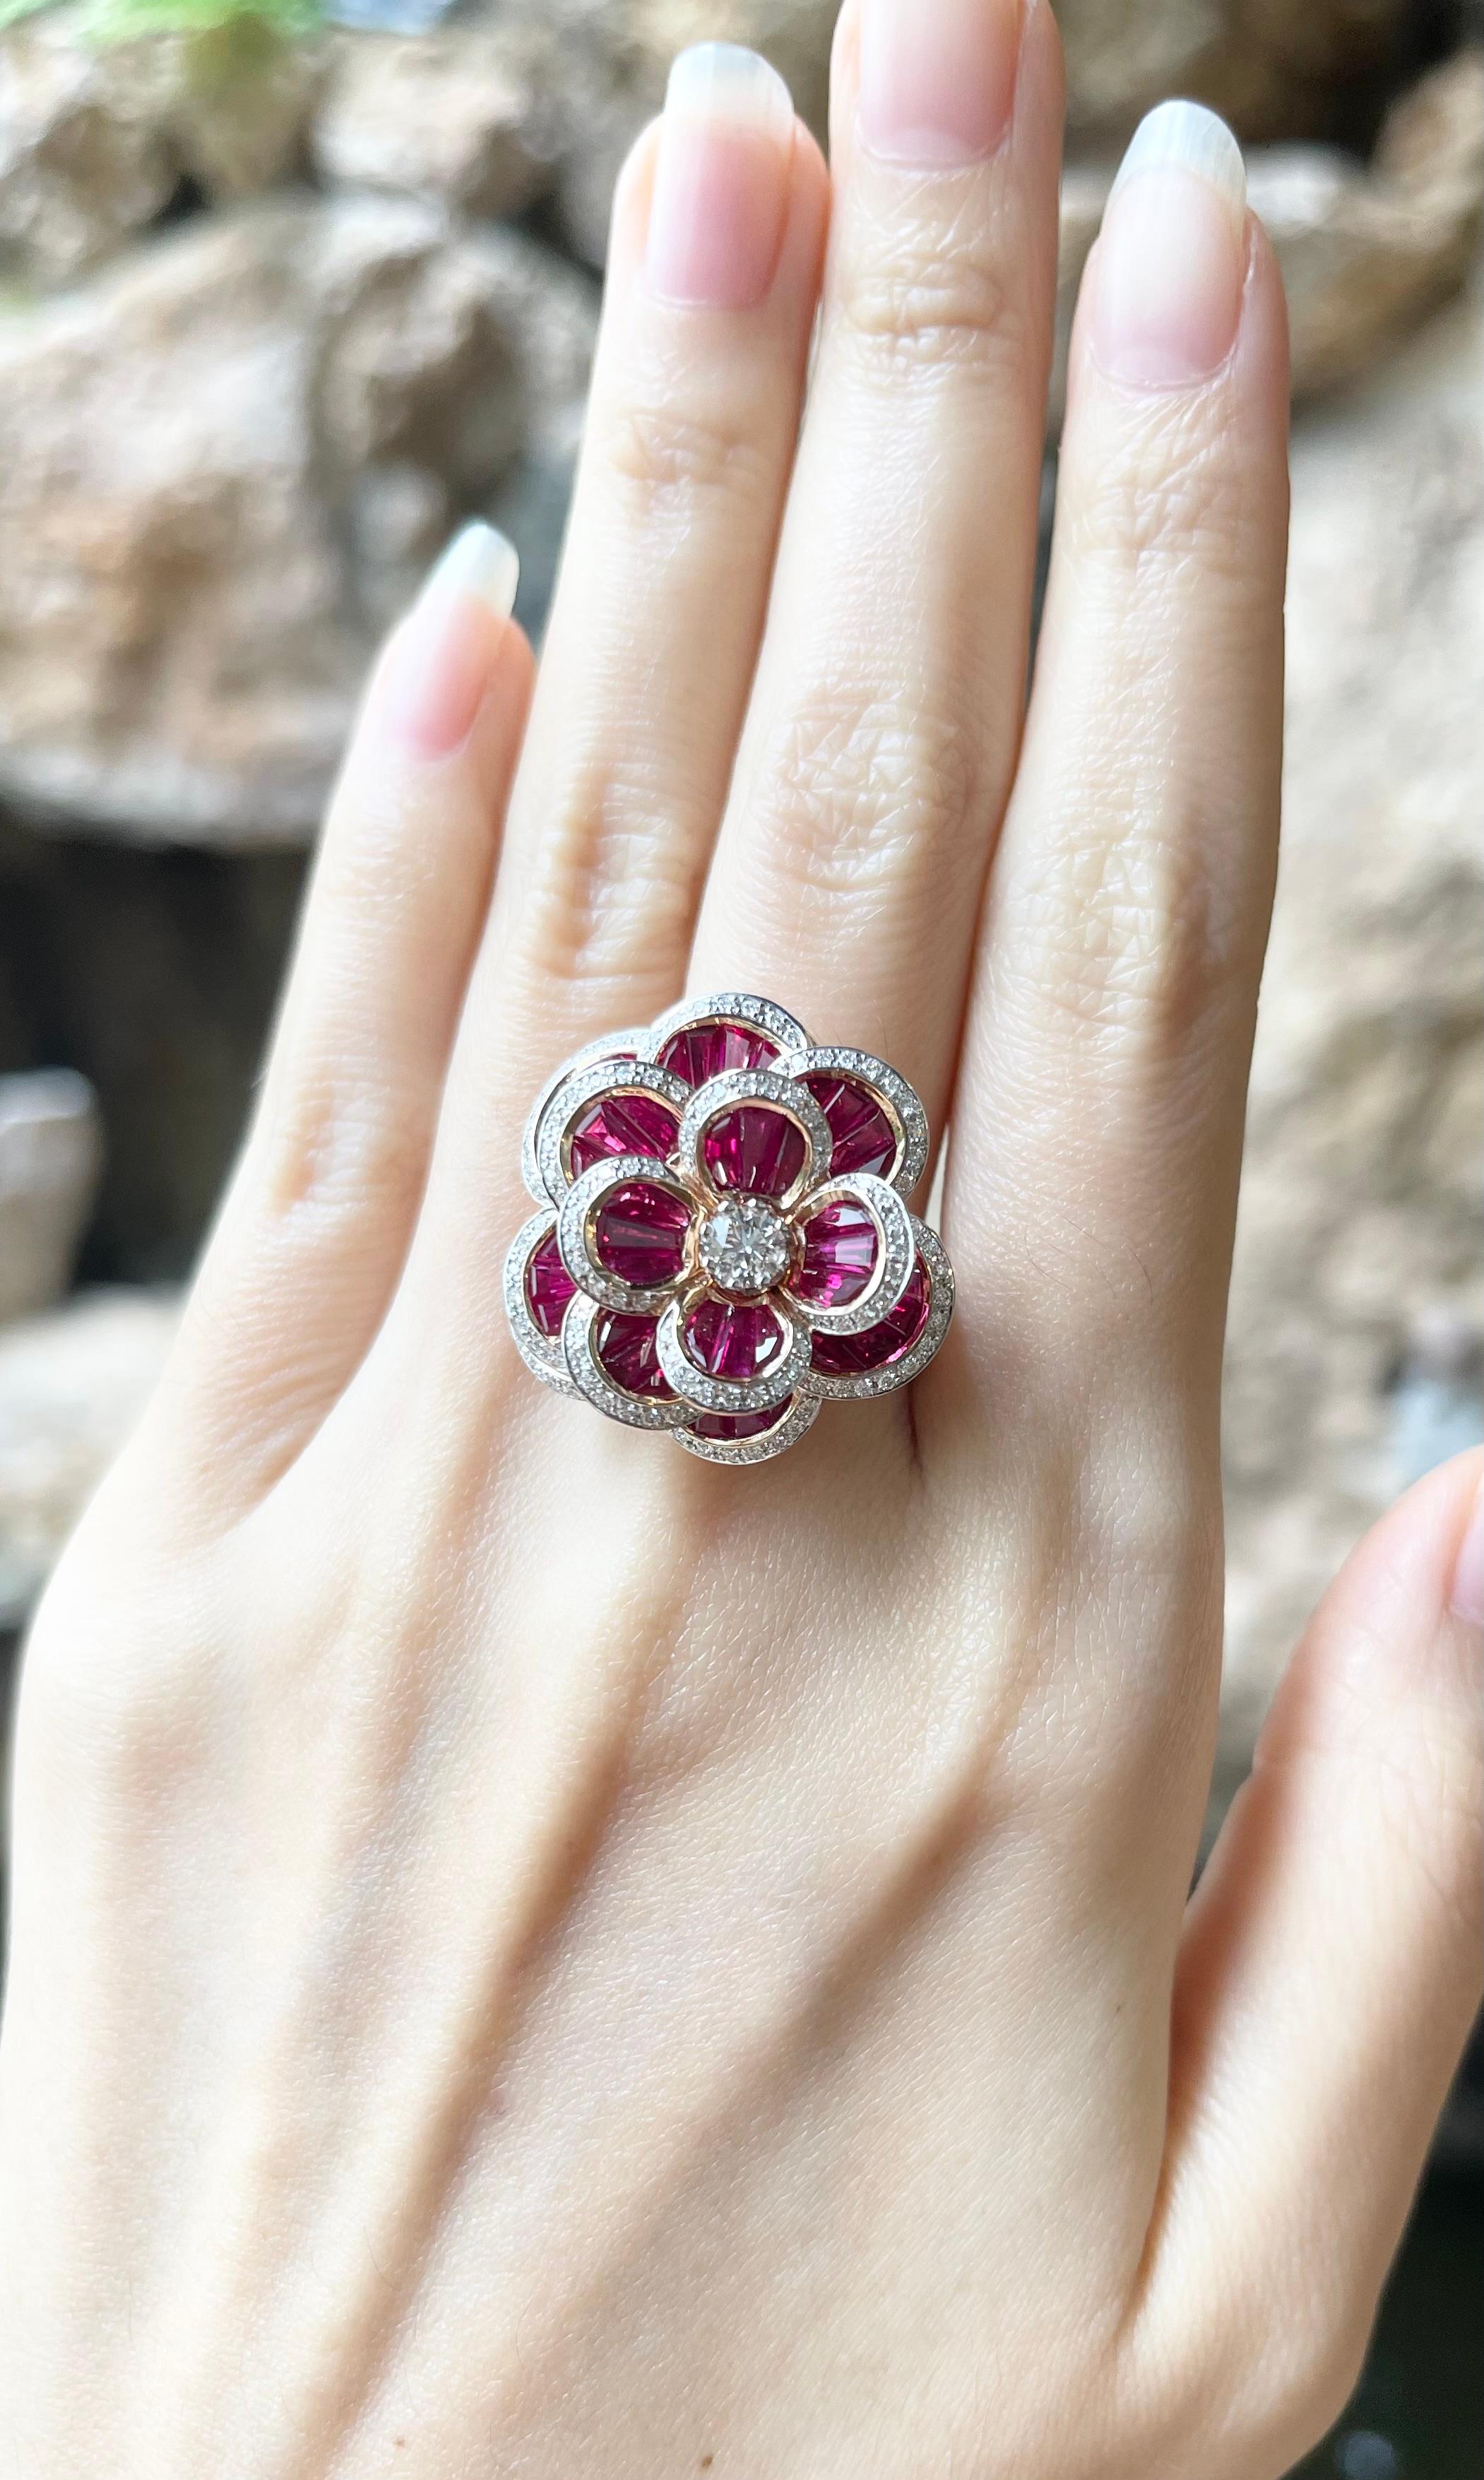 Ruby 9.57 carats with Diamond 0.84 carat Ring set in 18K Rose Gold Settings

Width:  2.8 cm 
Length: 2.8 cm
Ring Size: 55
Total Weight: 21.12 grams

